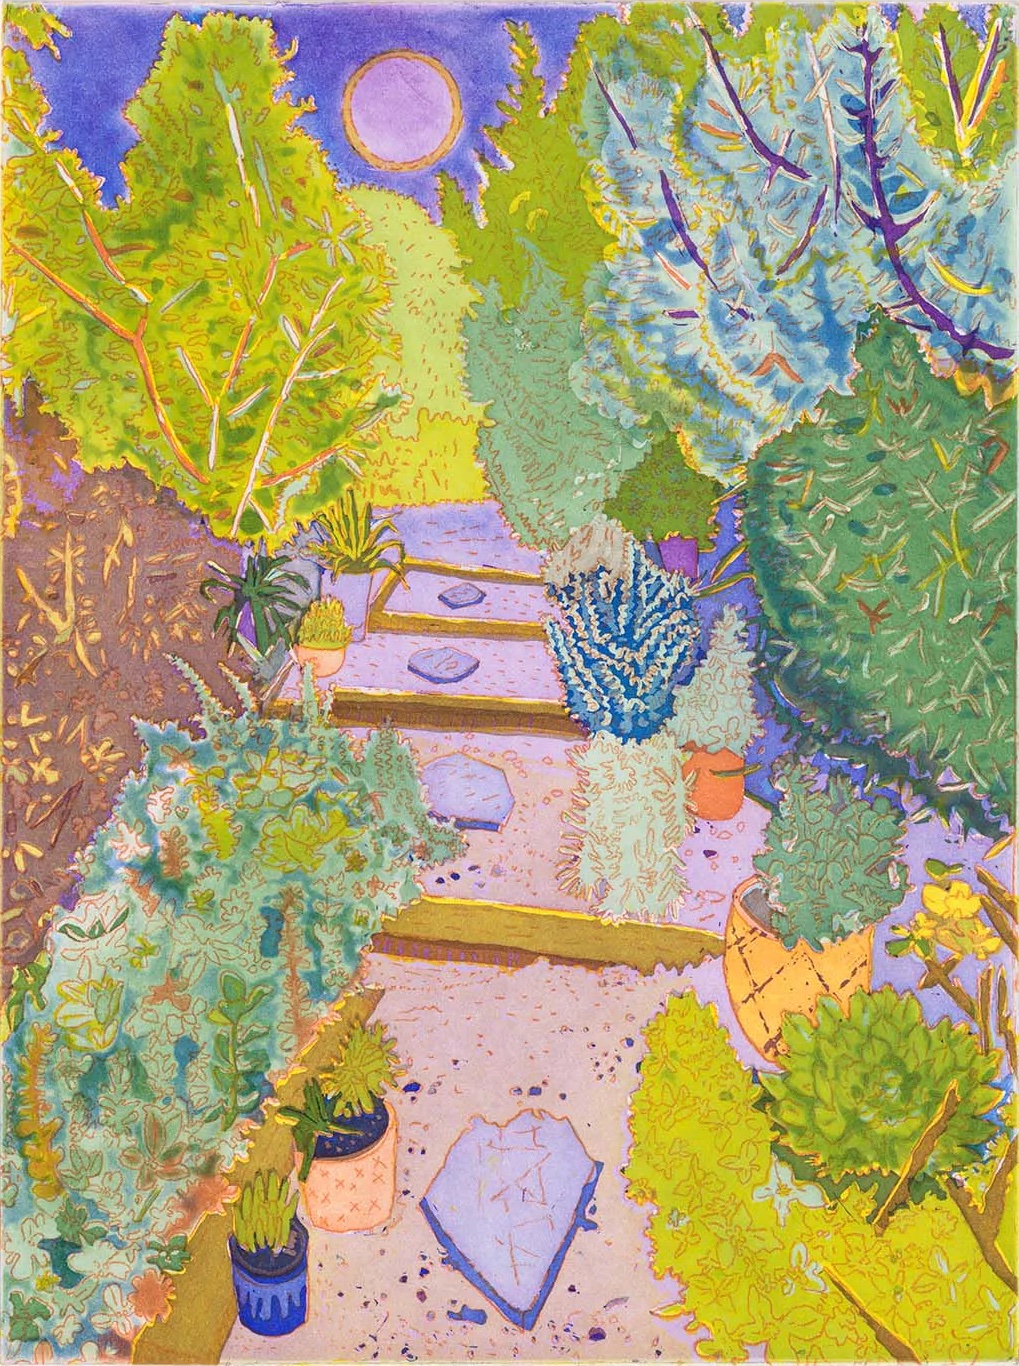 A brightly colored painting of foliage with a path going through it. In the sky above is a gold ring.